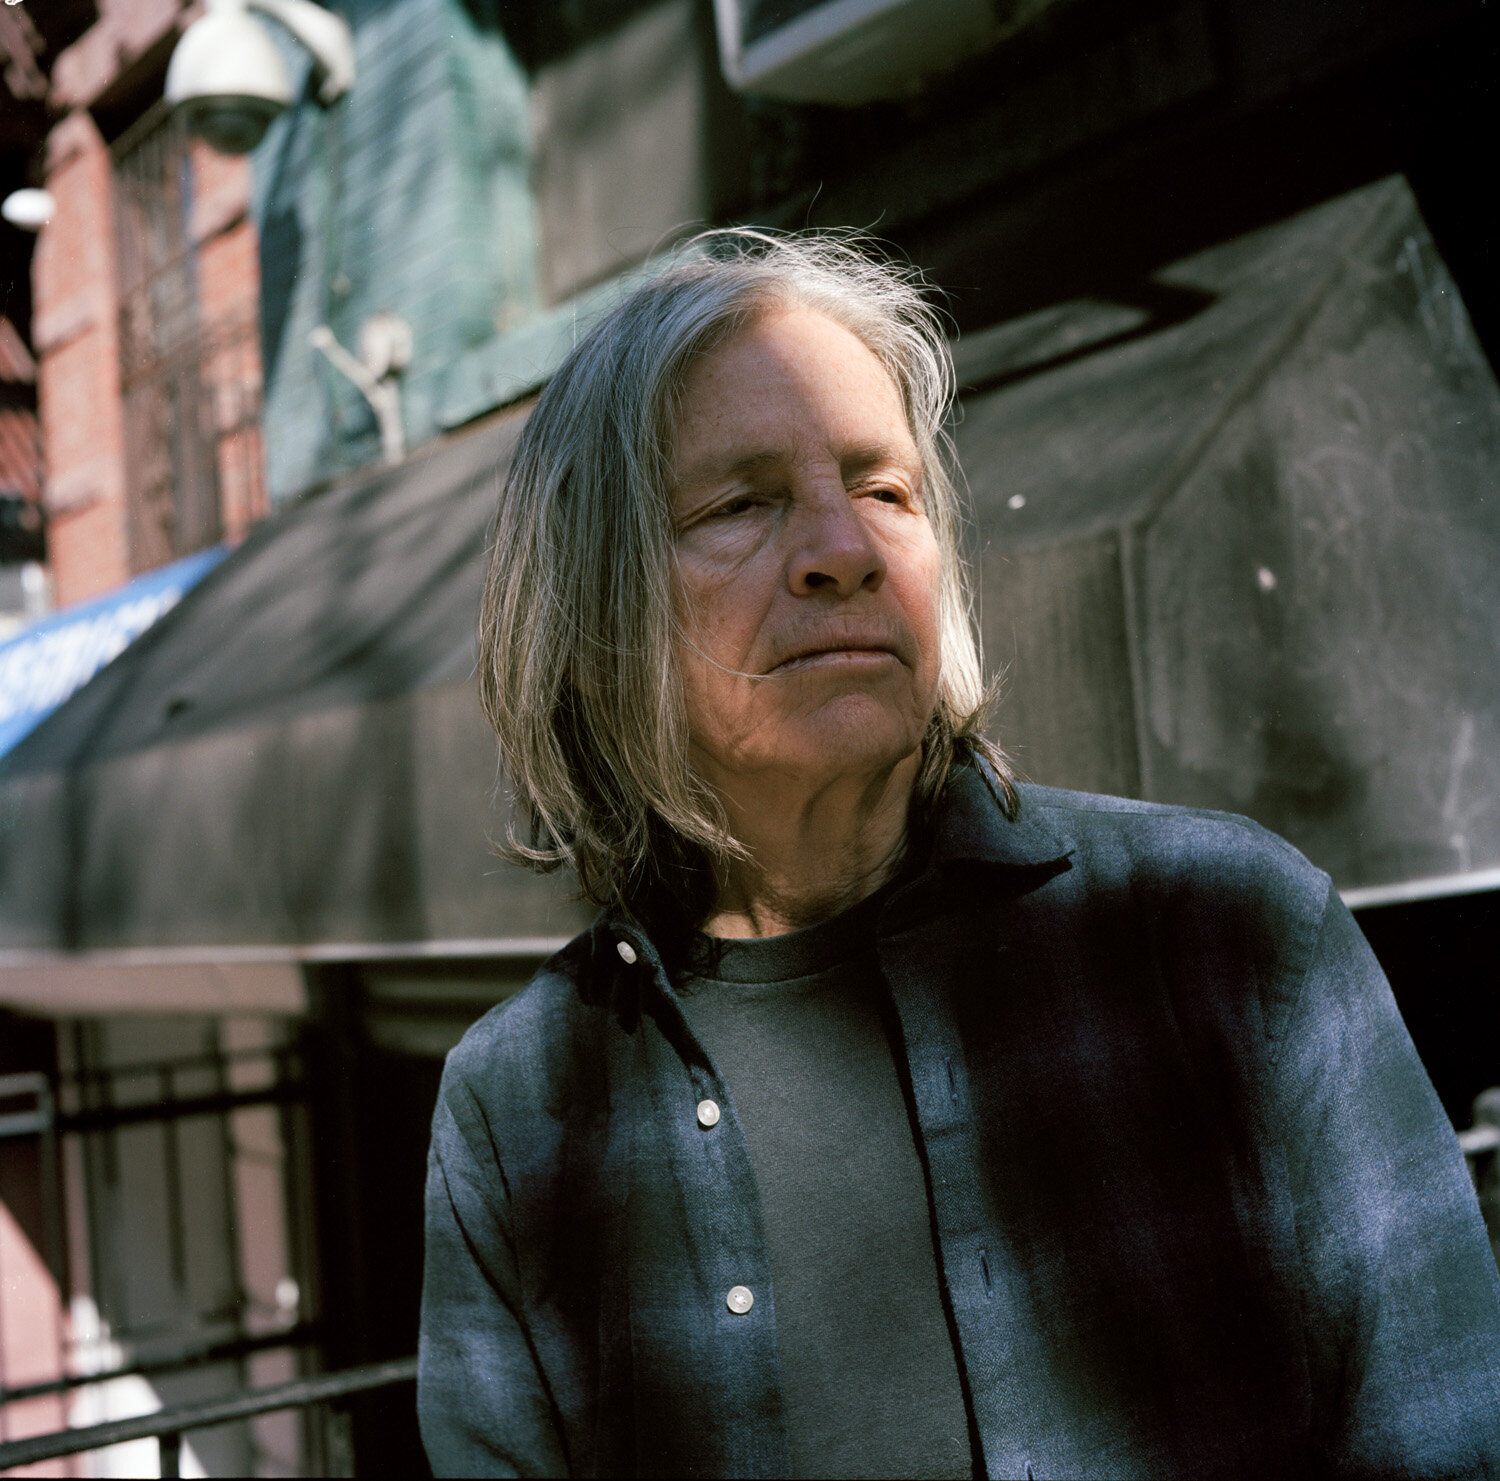  New York City 2019 03 11 Eileen Myles, writer and poet. Shot in New York on assignment for Dagens Nyheter. Shot on a Rolliflex and Kodak porta 160. 